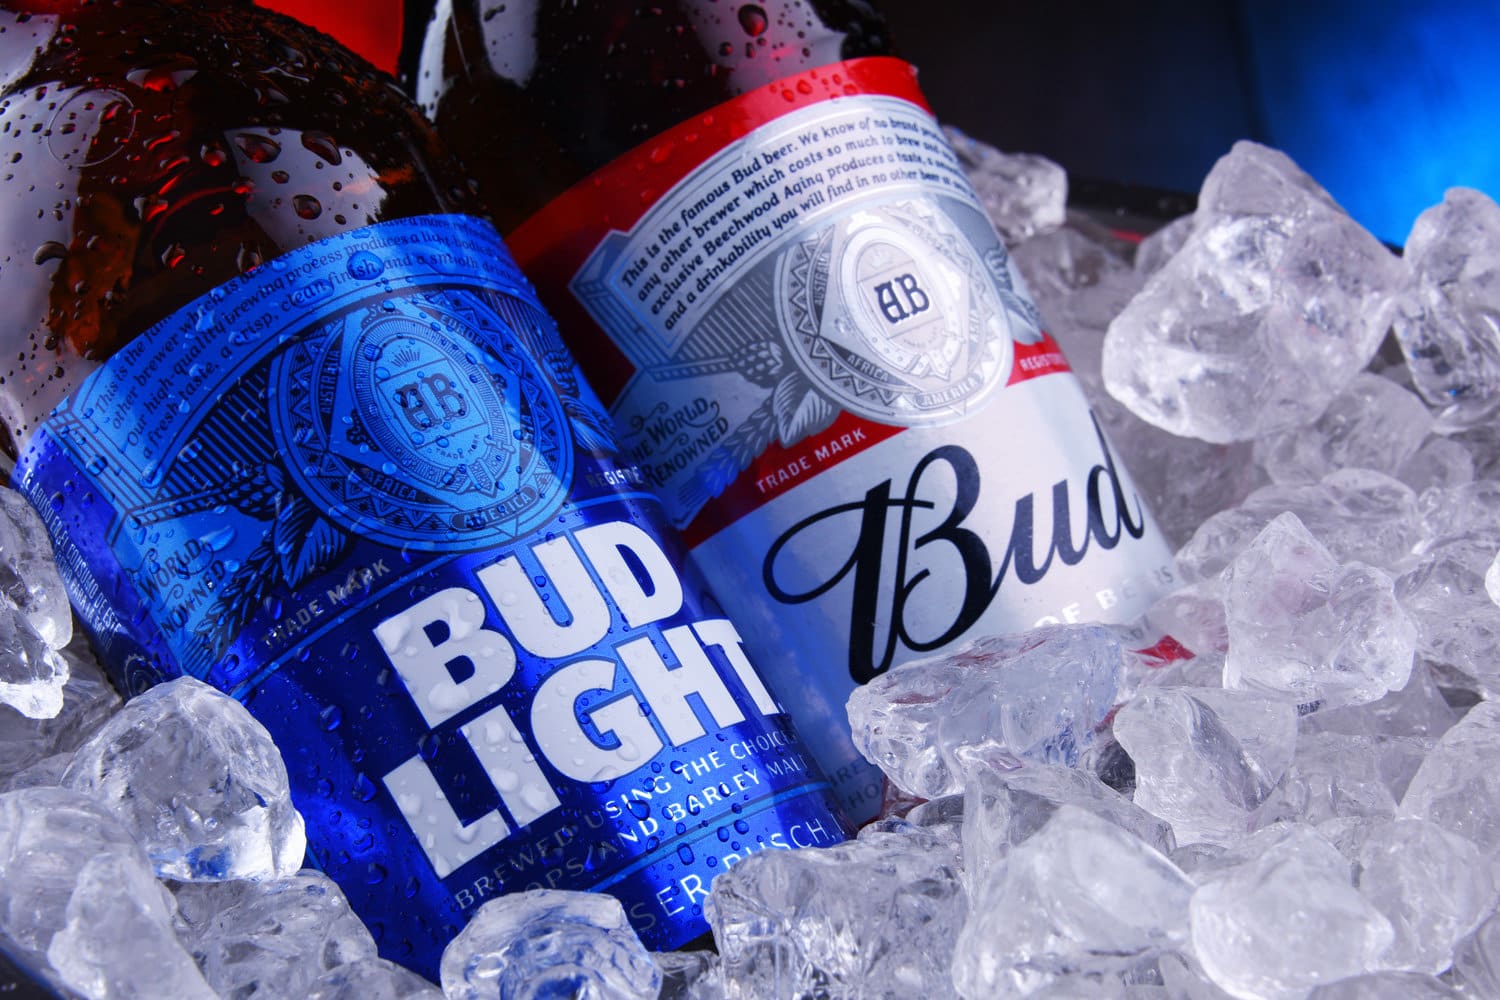 Bottles of Bud and Bud Light, popular American beers, produced by Anheuser-Busch.